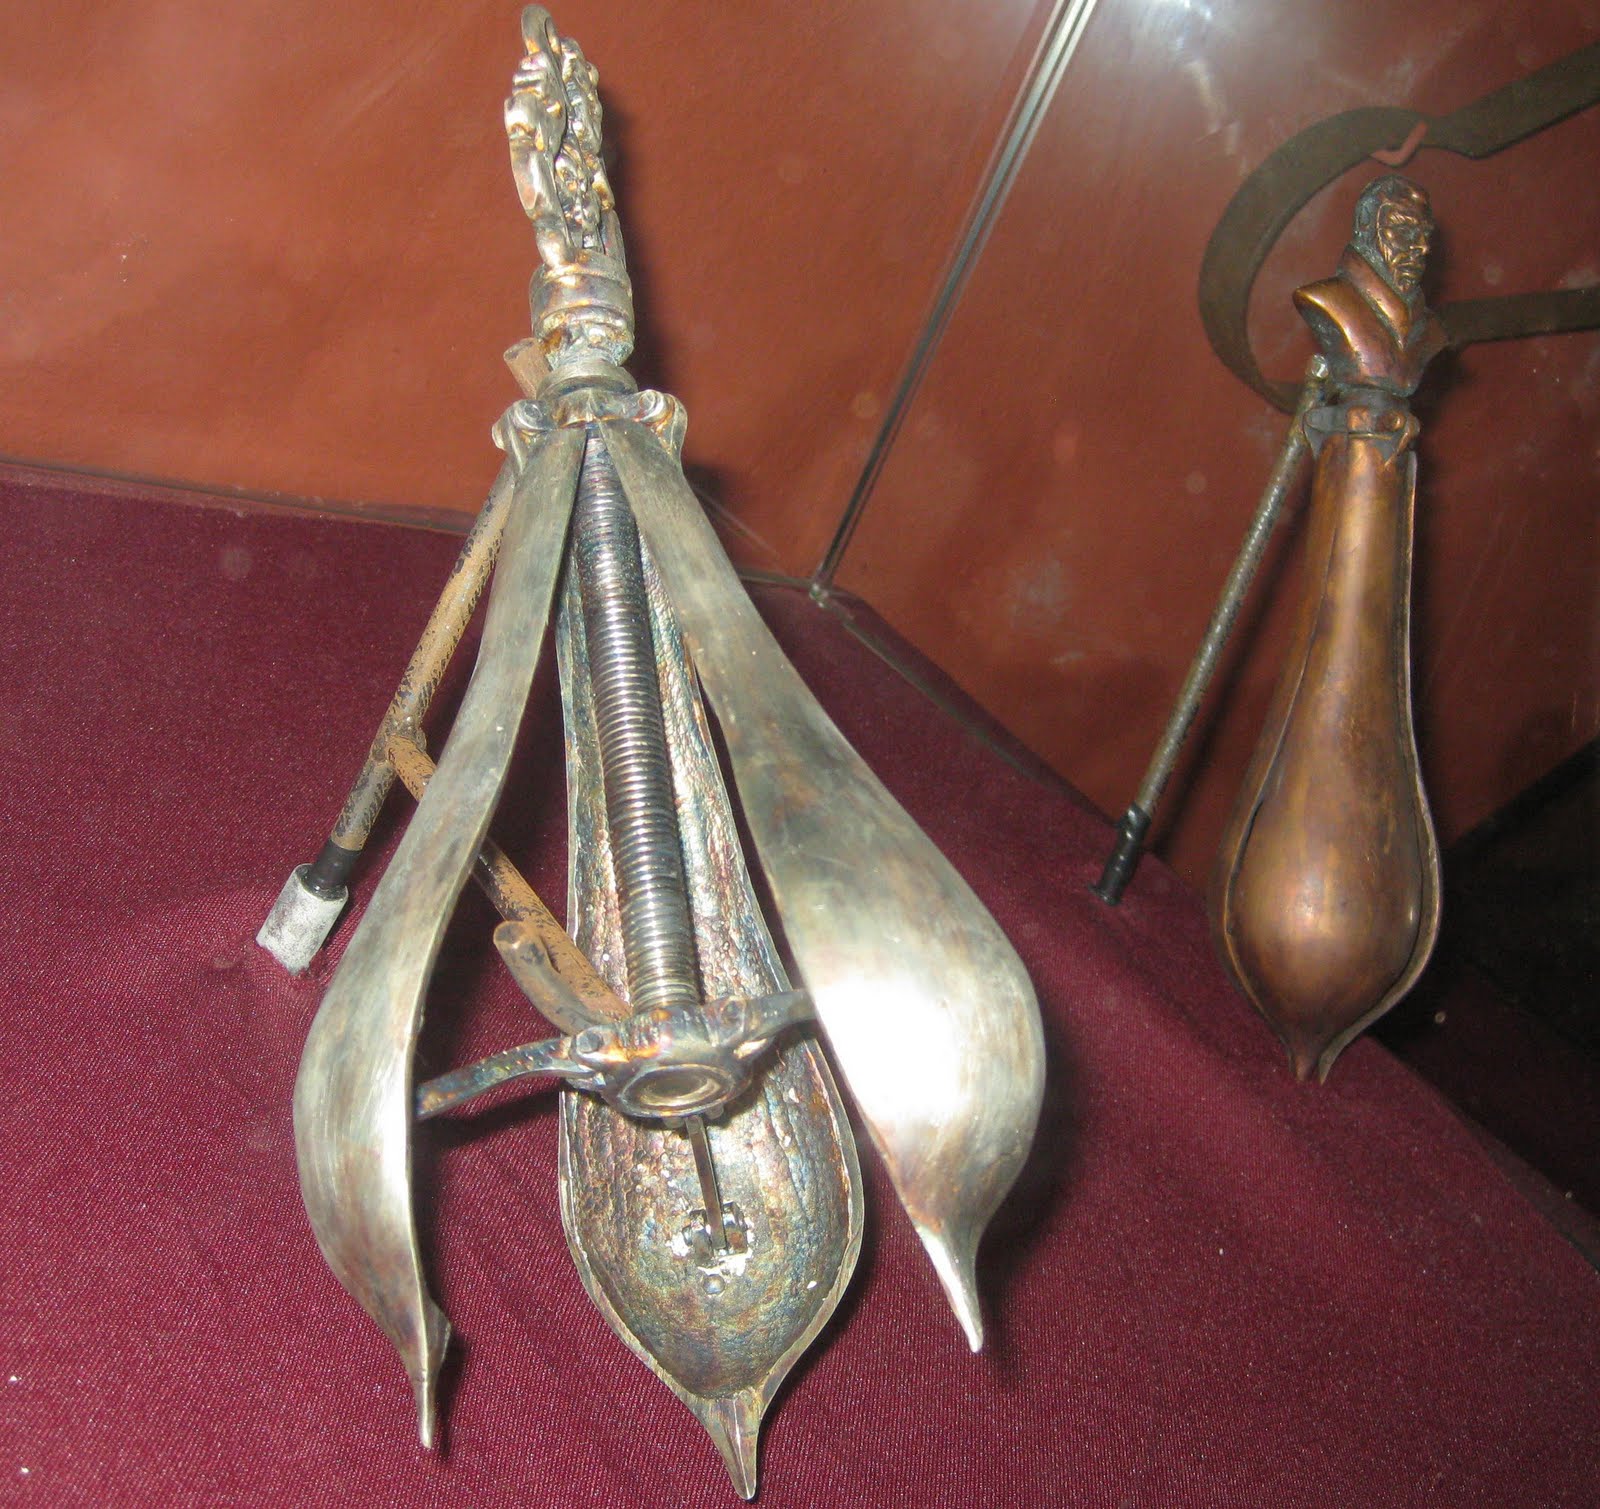 The Pear of Anguish - A pear-shaped instrument was inserted into one of the victim's orifices: the vagina for women, the anus for homosexuals and the mouth for liars and blasphemers.The instrument consisted of four leaves that slowly separated from each other as the torturer turned the screw at the top. It was the torturer's decision to simply tear the skin or expand the "pear" to its maximum and mutilate the victim.